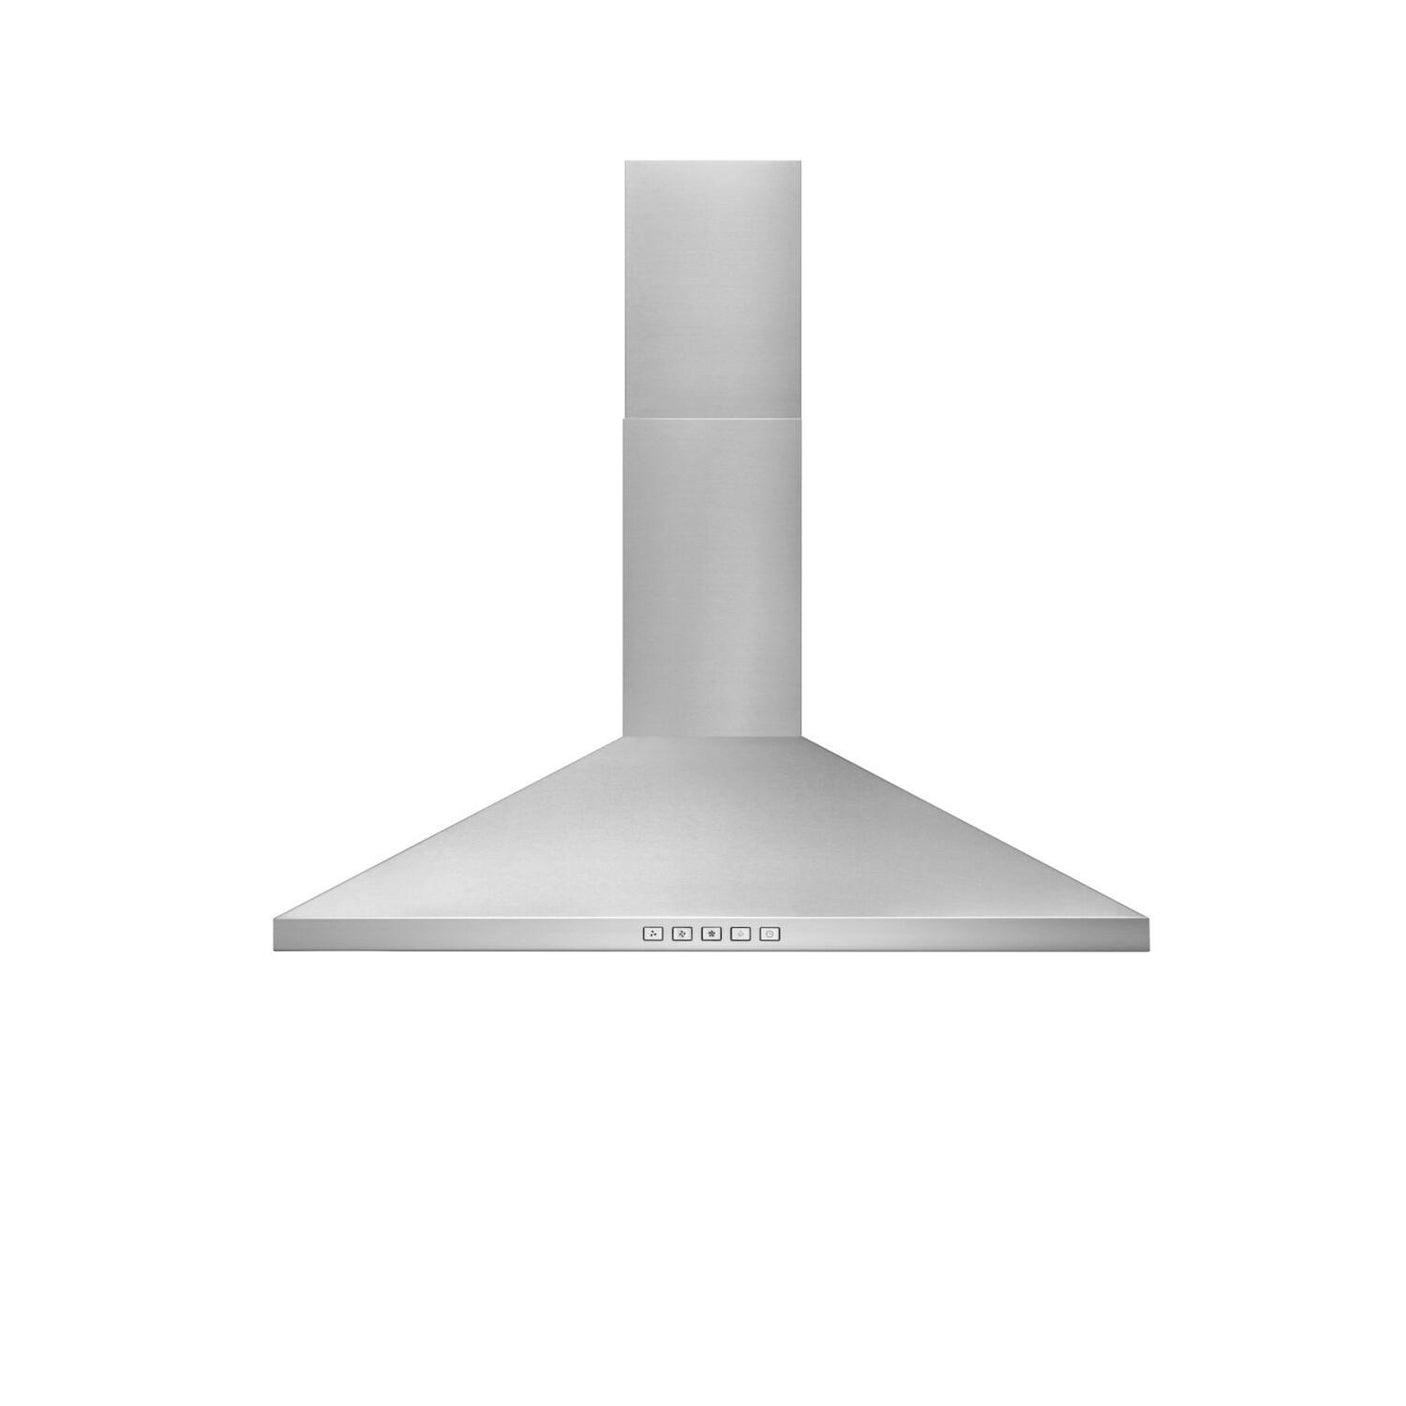 **DISCONTINUED** Broan® 36-Inch Convertible Wall-Mount Pyramidal Chimney Range Hood, 450 MAX CFM, Stainless Steel